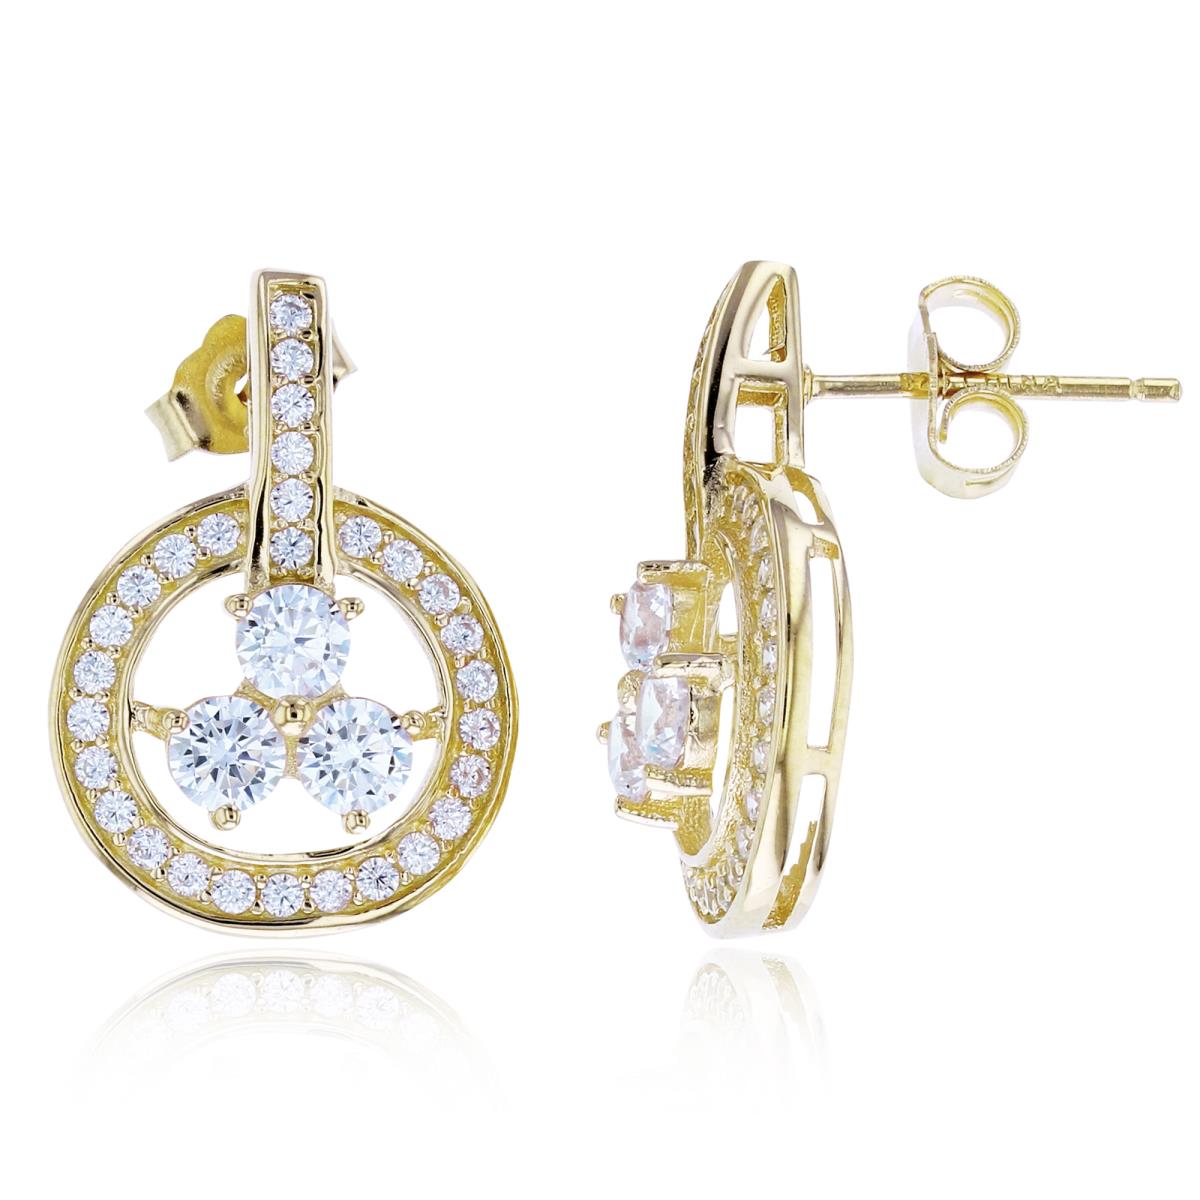 Sterling Silver+1Micron Yellow Gold 3.5mm Rnd CZ Center of Micropave Open Circle Earrings